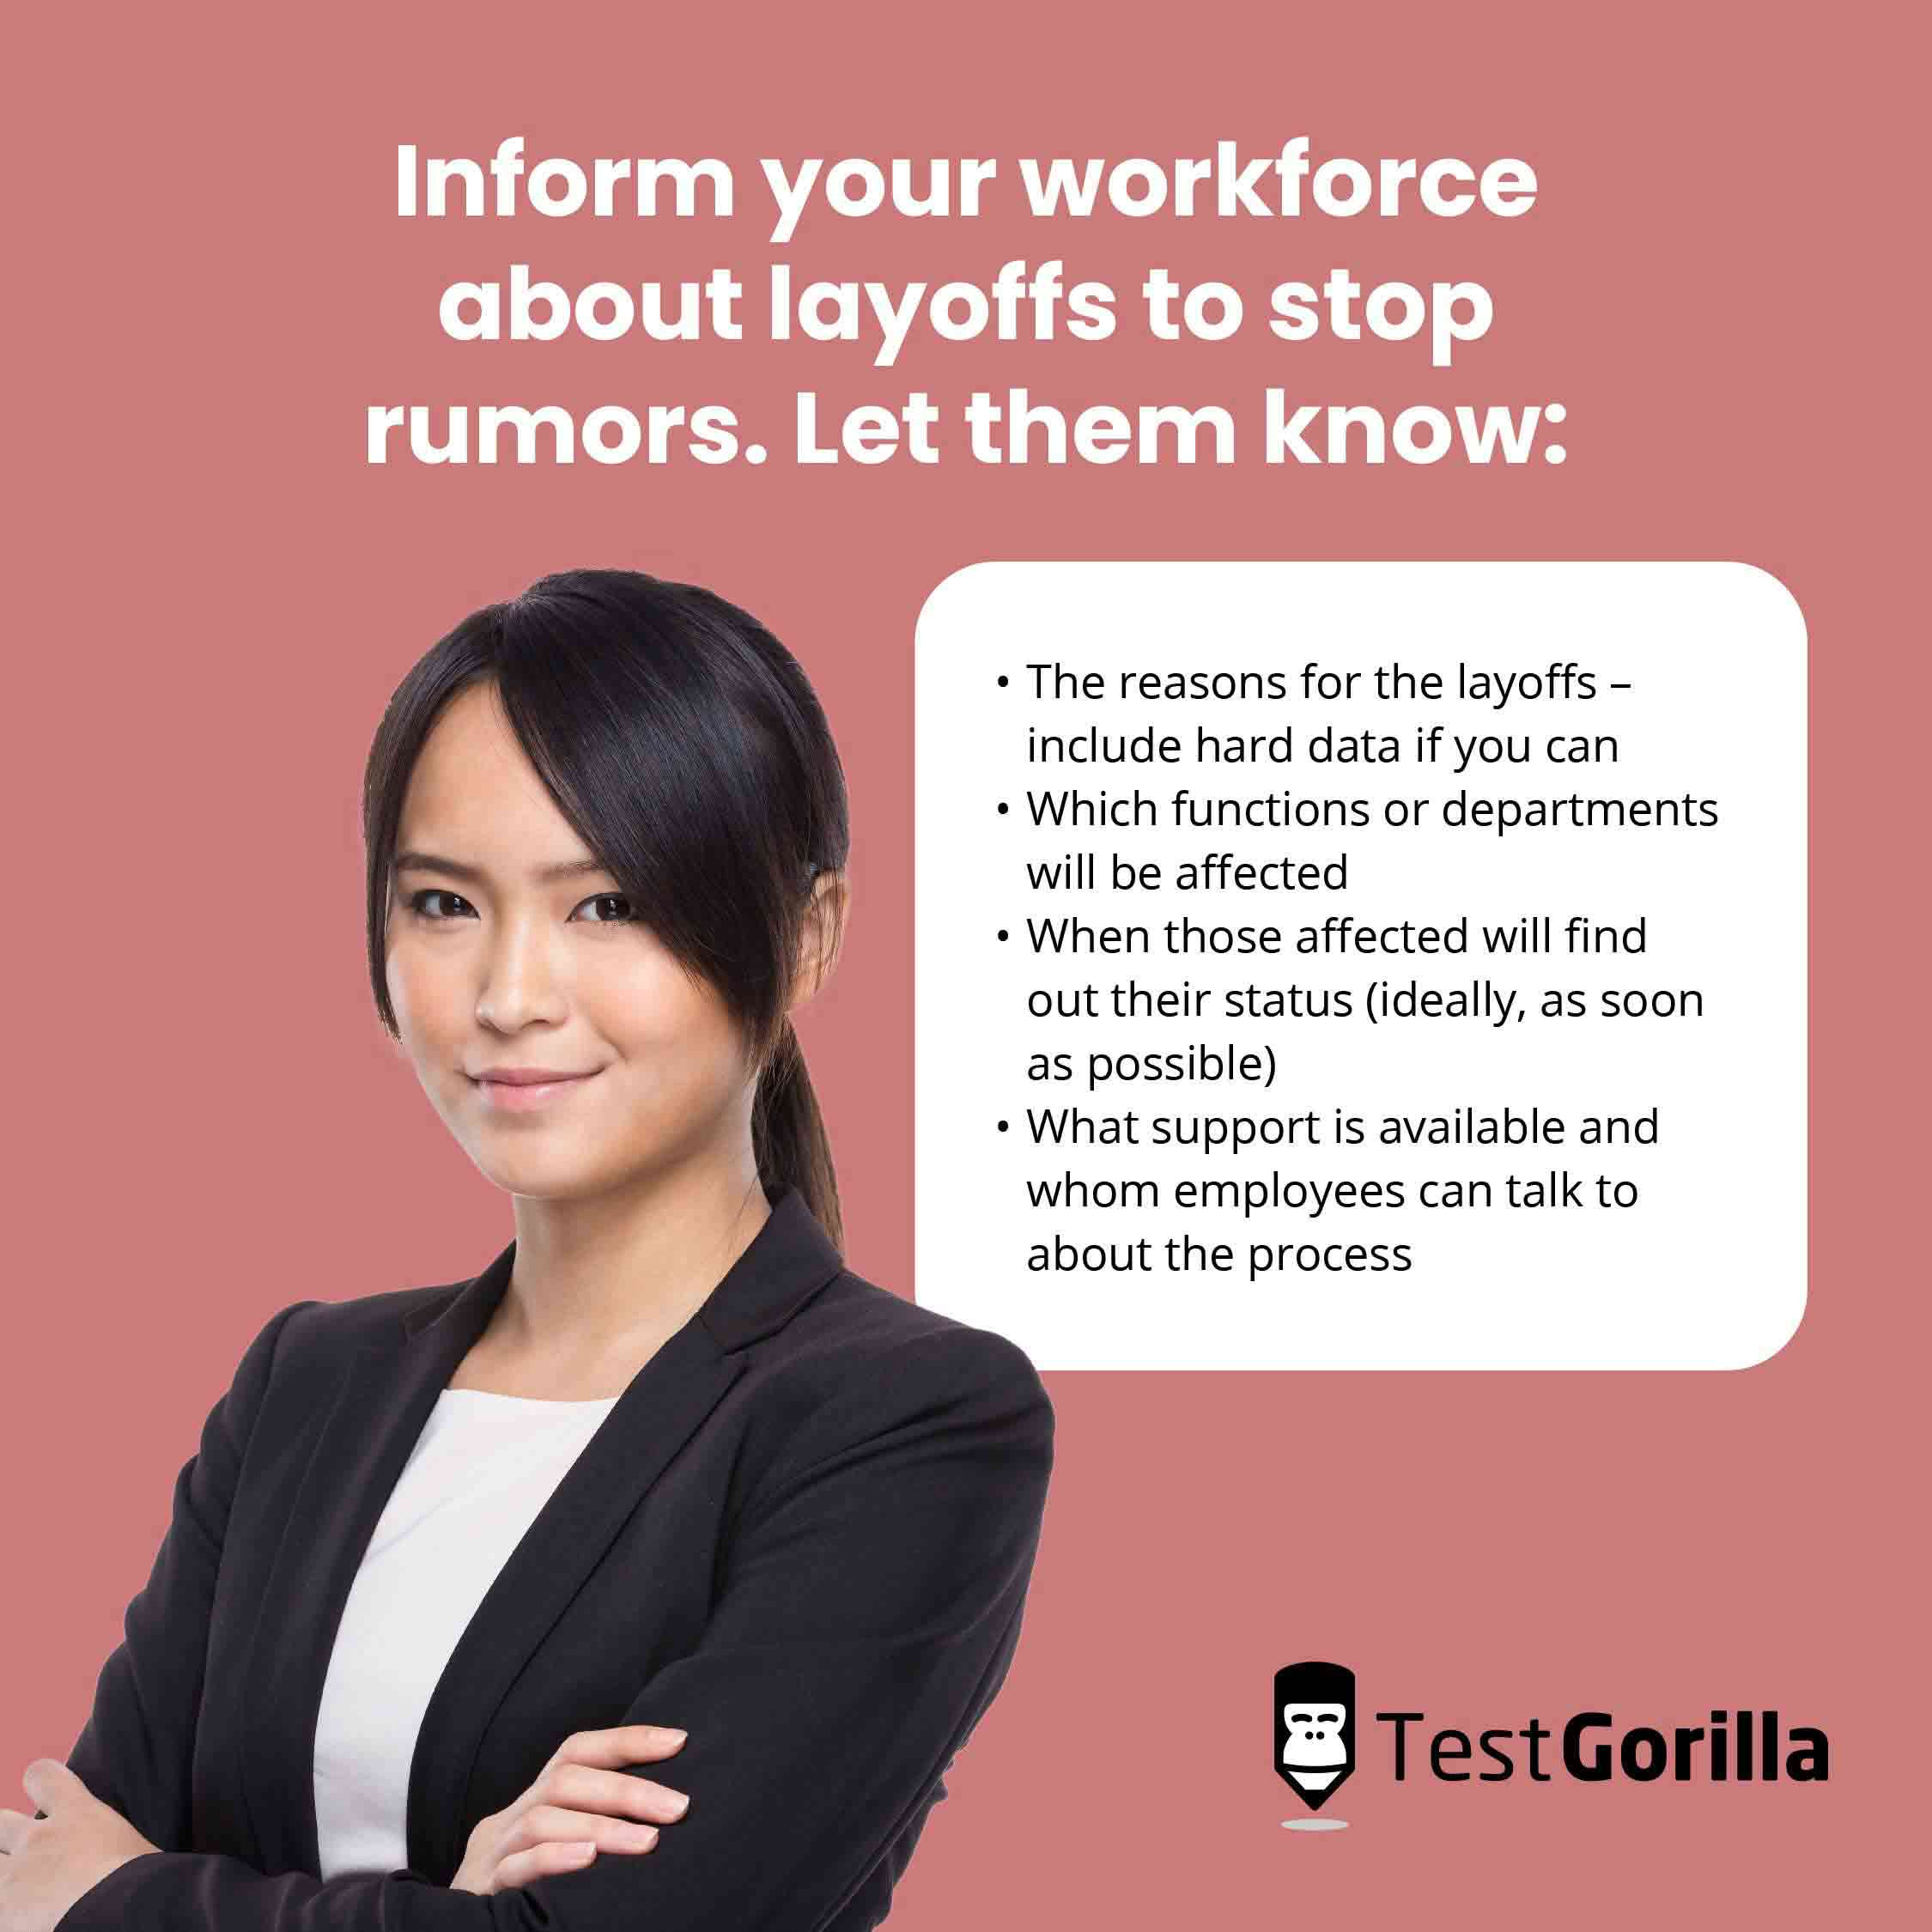 Image showing how to inform your workforce about layoffs to stop rumors